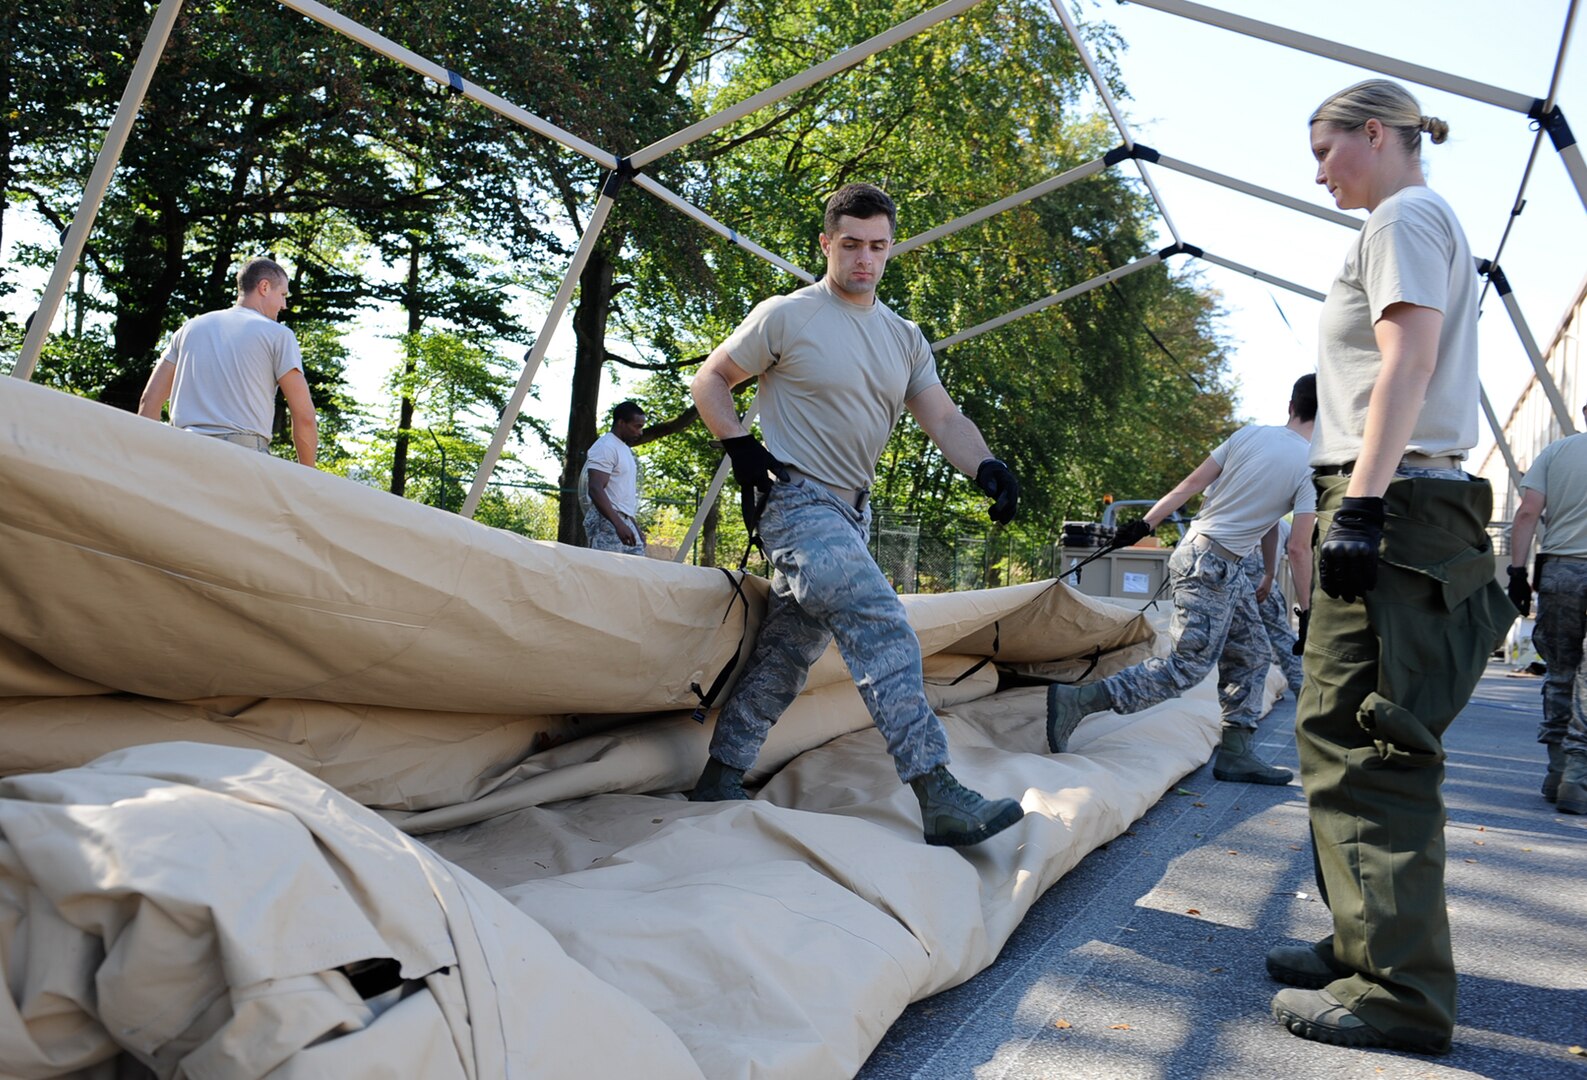 Staff Sgt. Tyler Wilson, 86th Medical Support Squadron war reserve material supervisor, helps fold a tent after it’s been cleaned out at Ramstein Air Base, Germany, Sept. 29, 2016. The Airmen have approximately 60 days after an exercise to clean and take inventory of unit type assemblages, which are packages that hold field hospital necessities such as tents and other medical equipment. (U.S. Air Force photo by Airman 1st Class Savannah L. Waters)